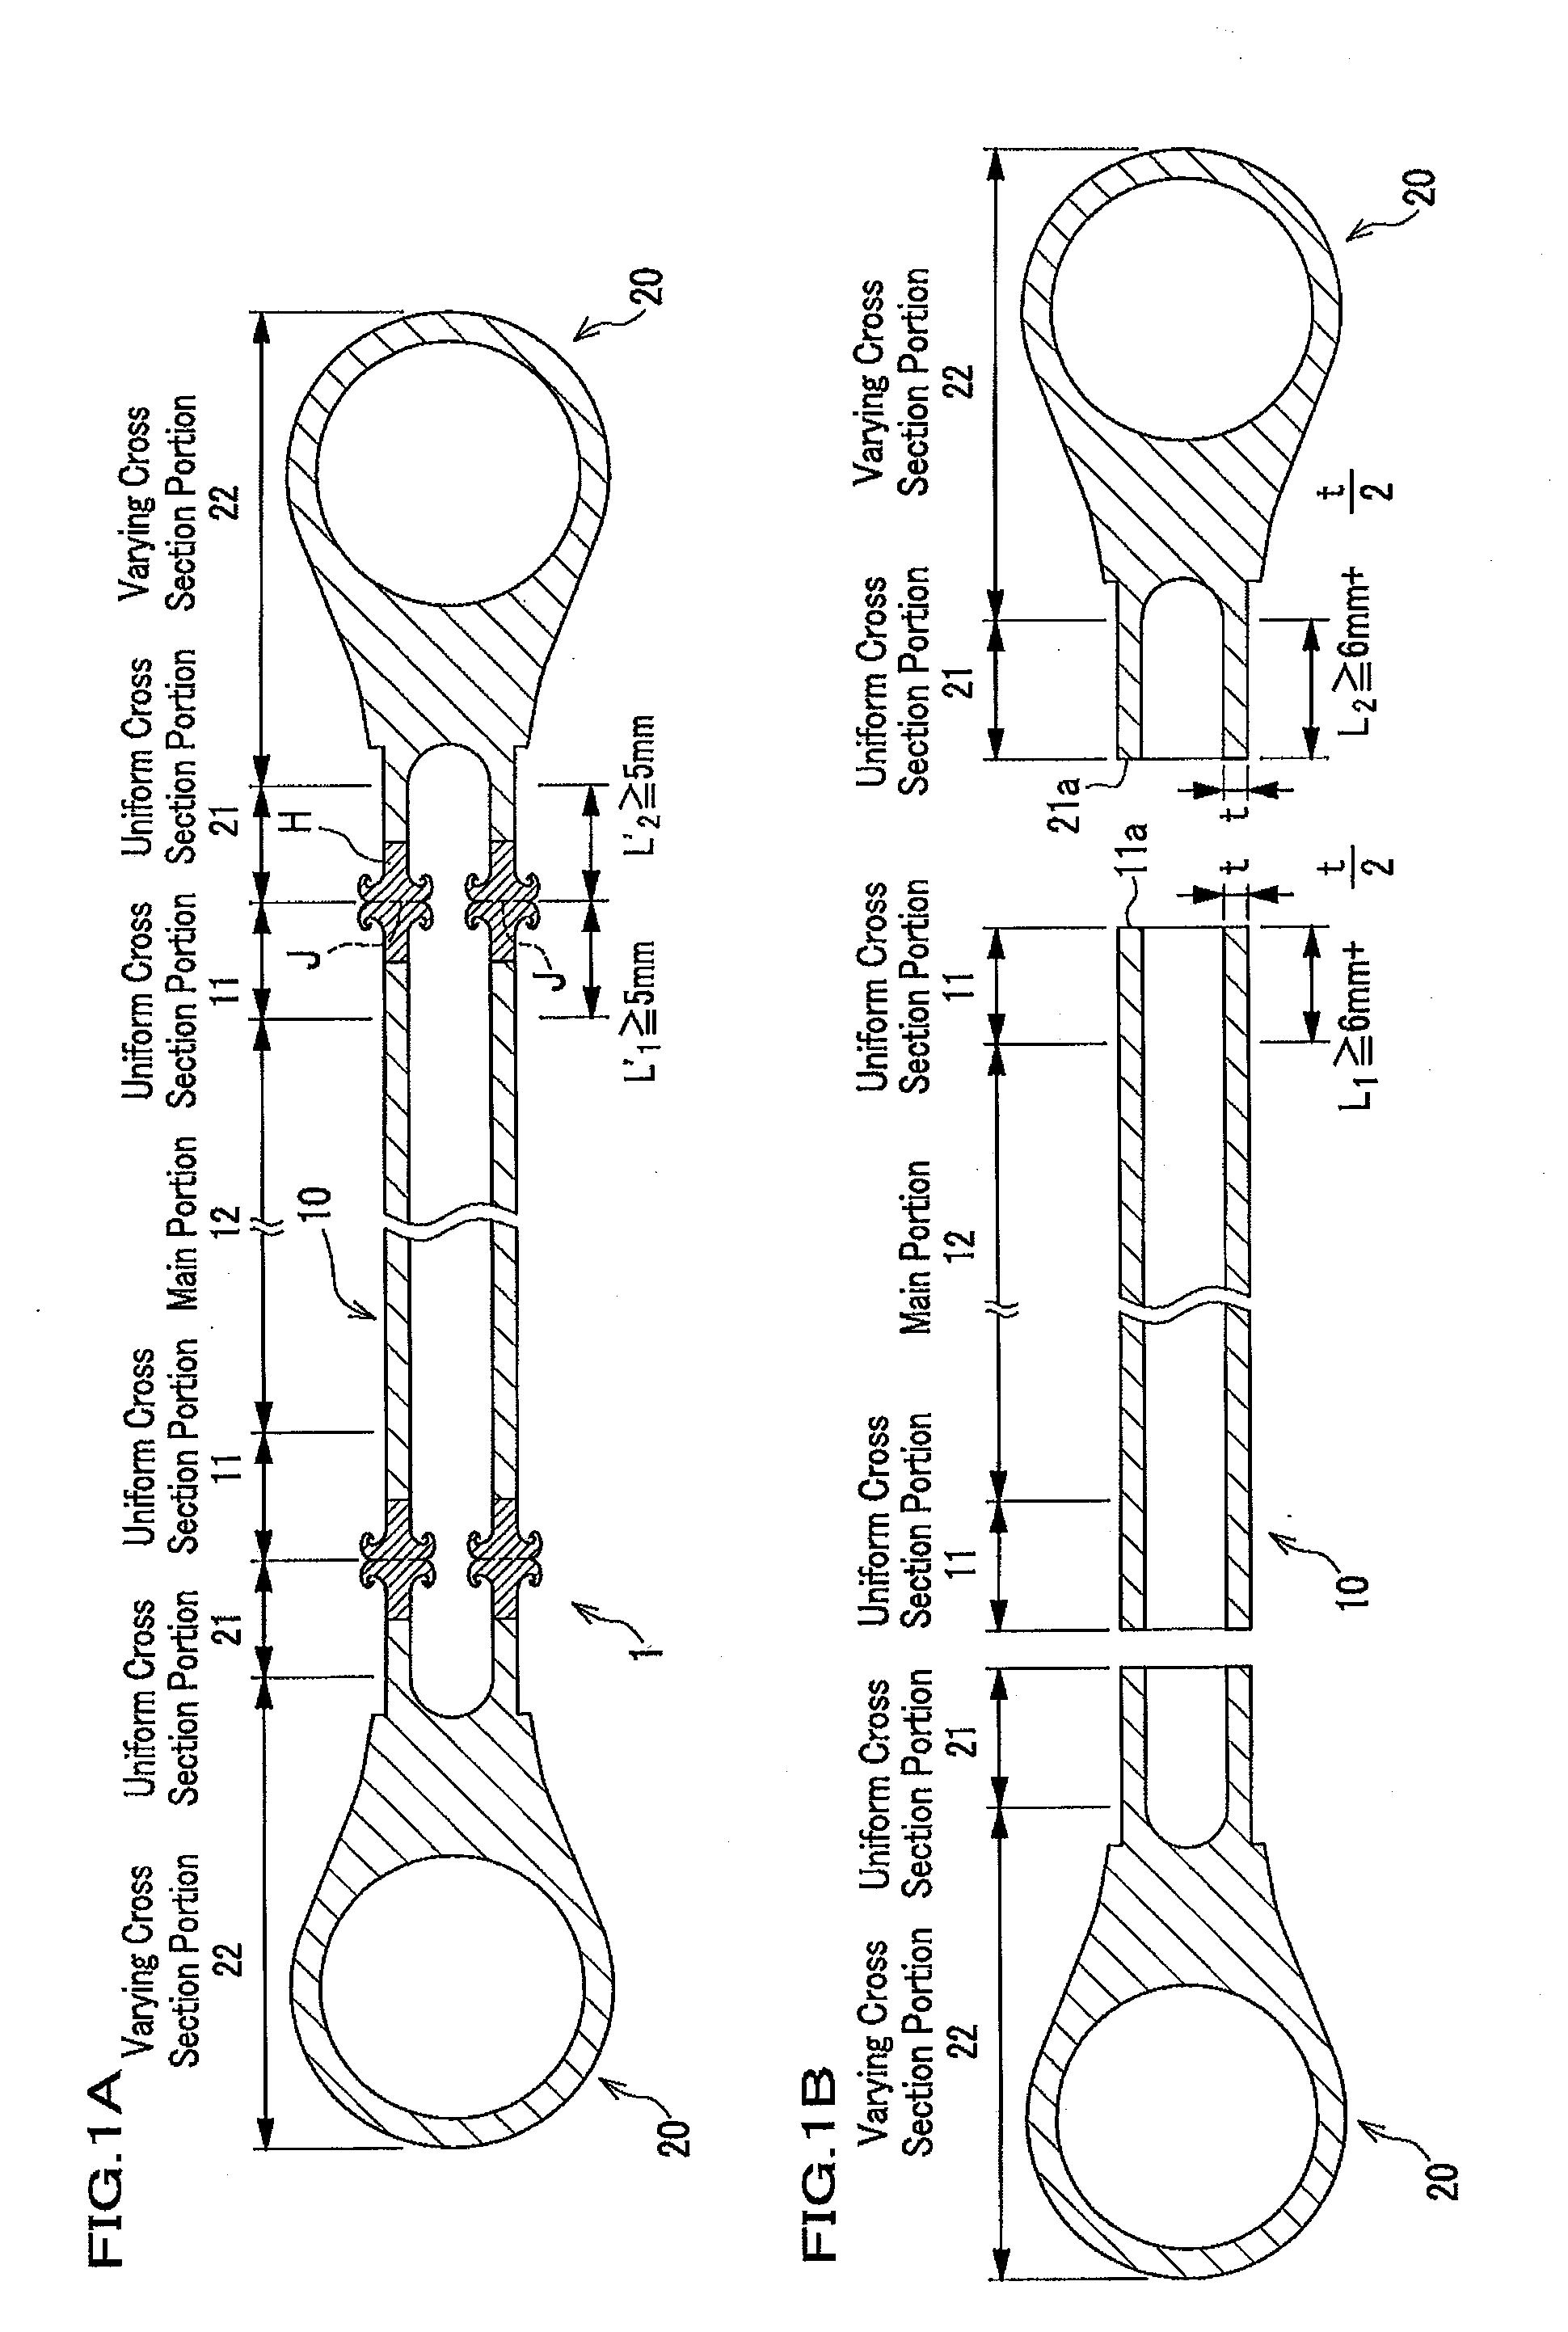 Friction-Welded Part and Method of Friction Welding